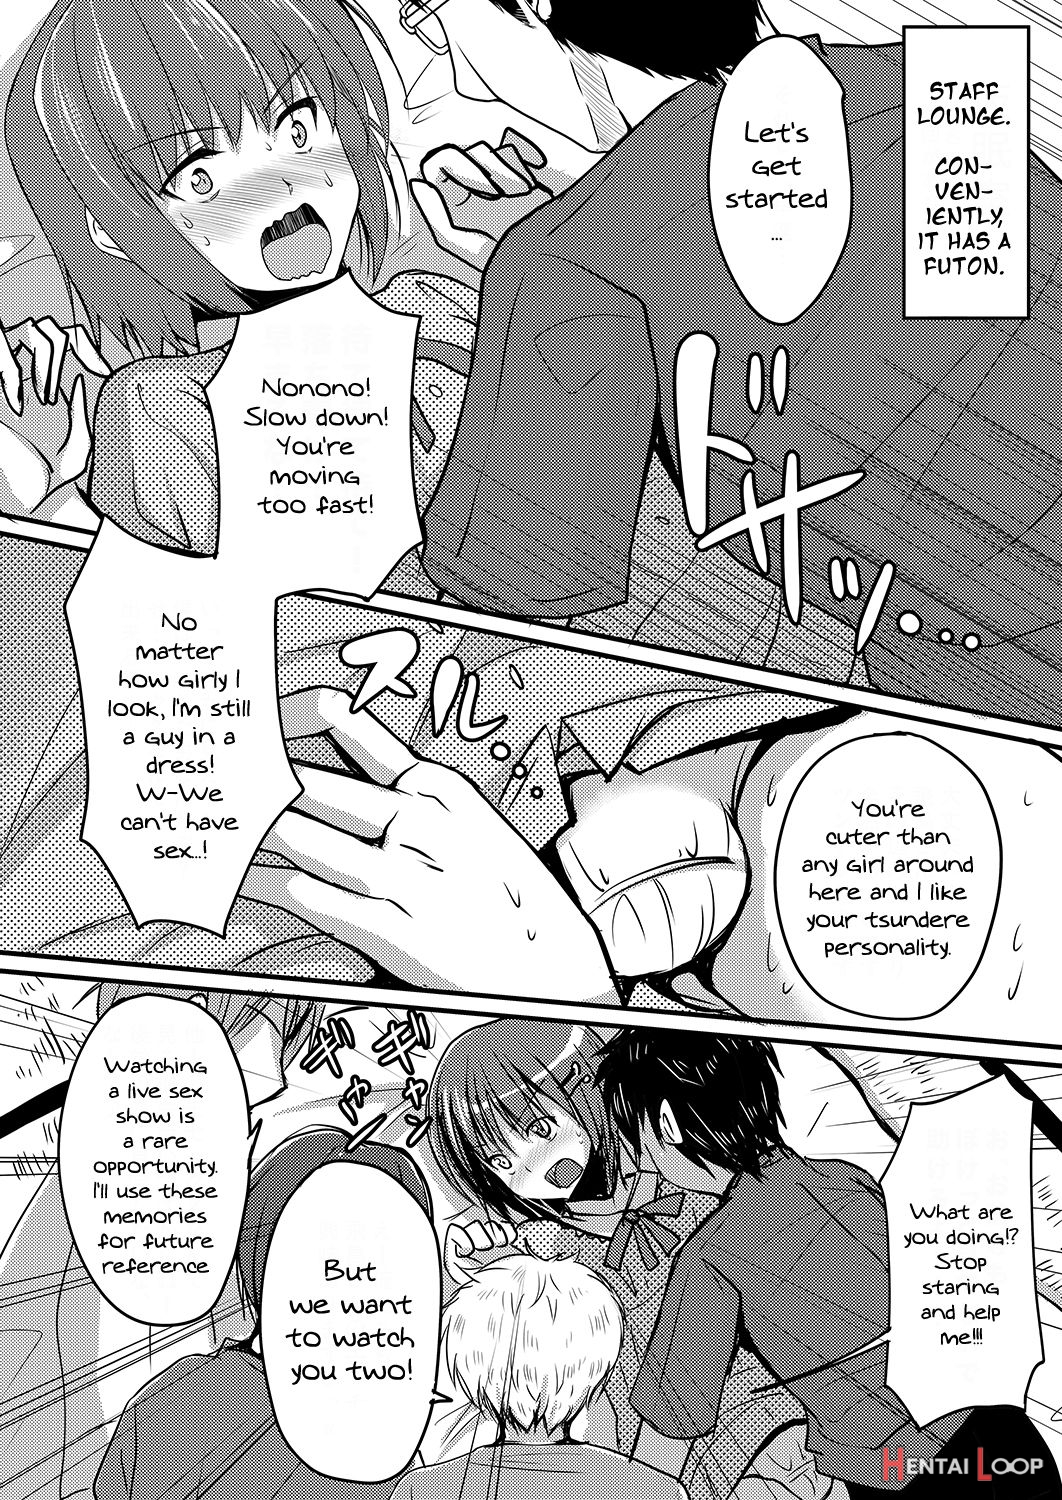 Page 7 of A Porn Author Whose Work Won't Sell Tries Crossdressing To  Understand A Woman's Feelings (by Chieko) - Hentai doujinshi for free at  HentaiLoop